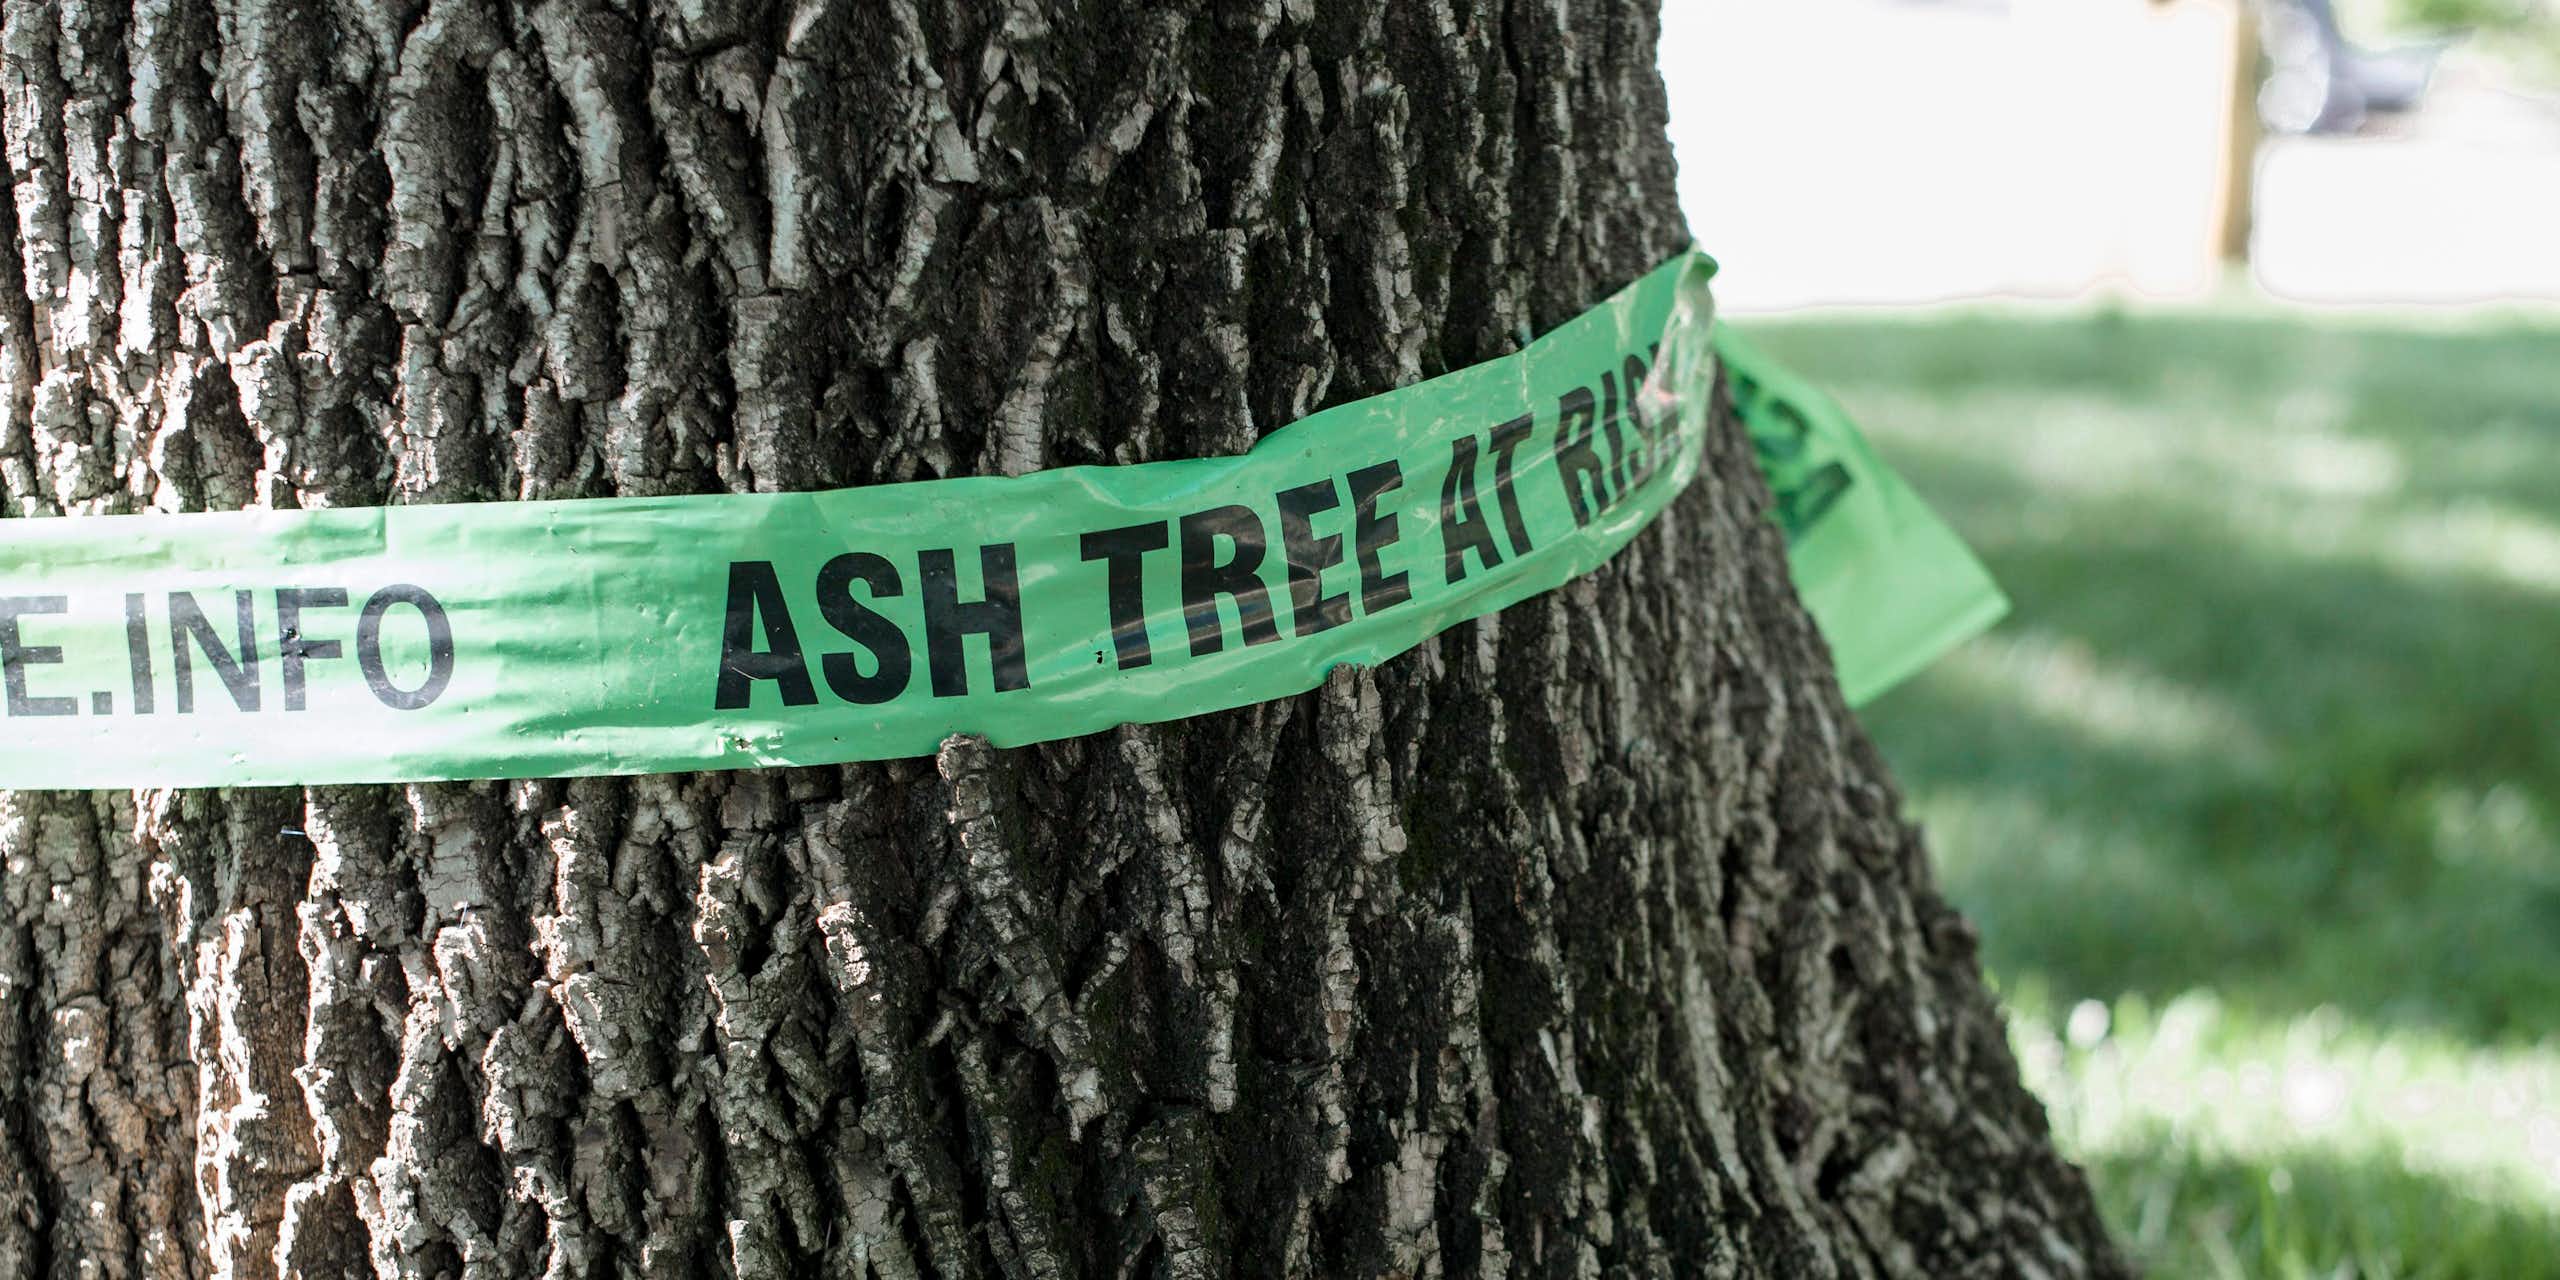 A tree is shown with a green ribbon around it.